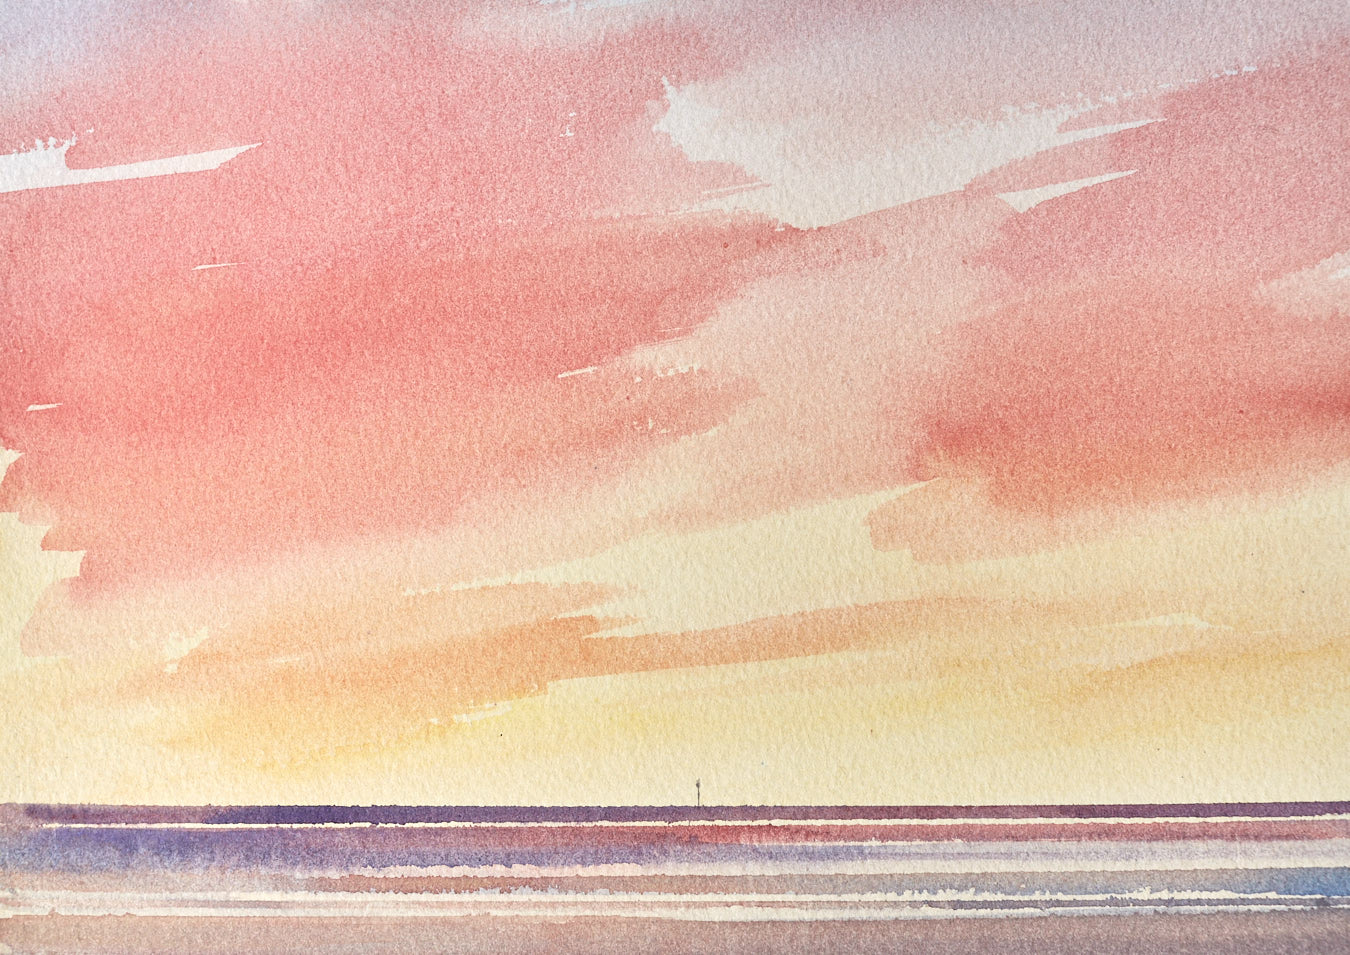 Large image of Twilight over the shore original watercolour painting